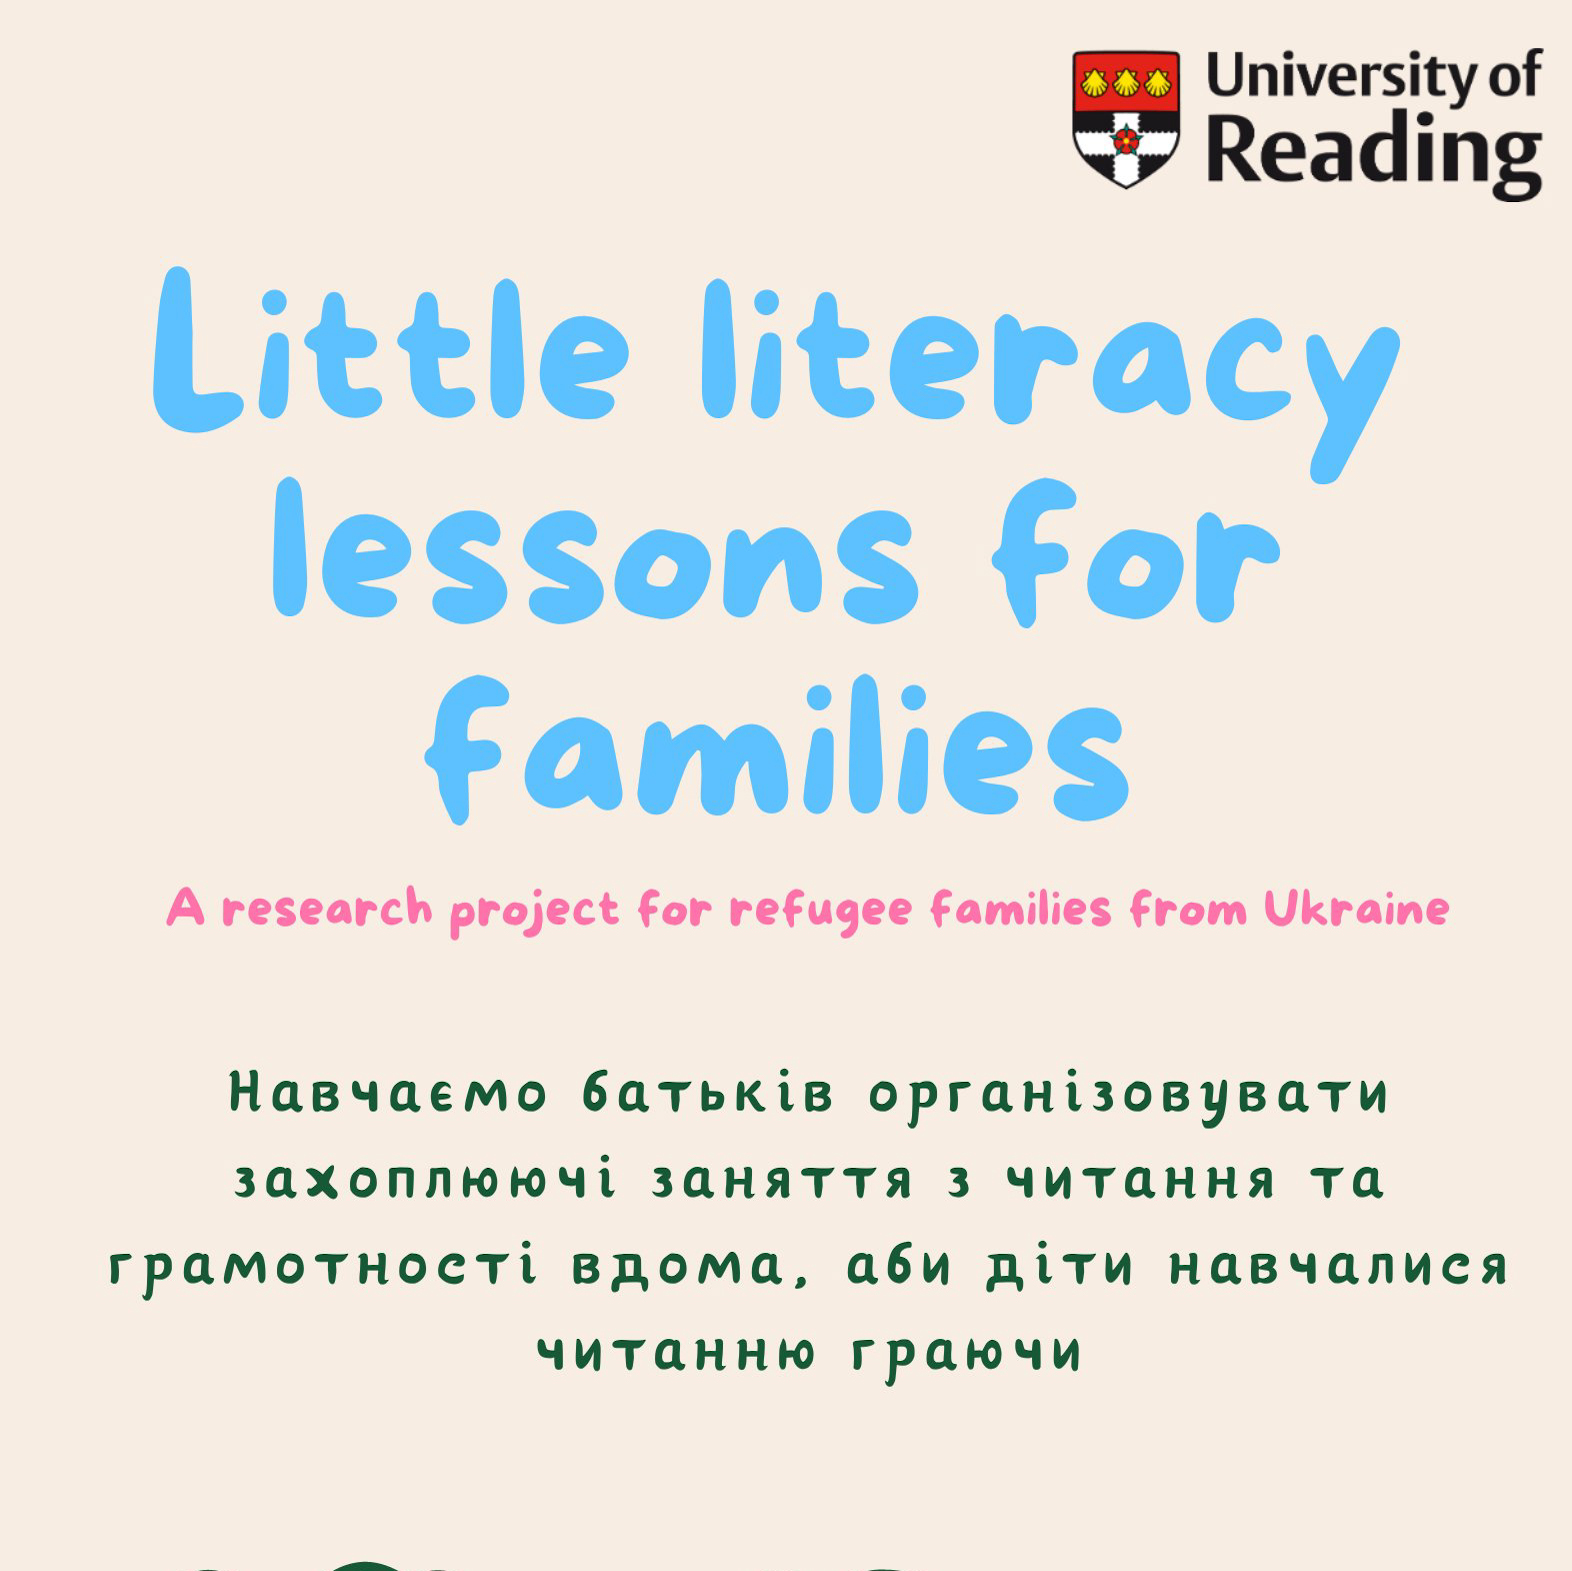 Call for refugee families from Ukraine to take part in upcoming literacy research project